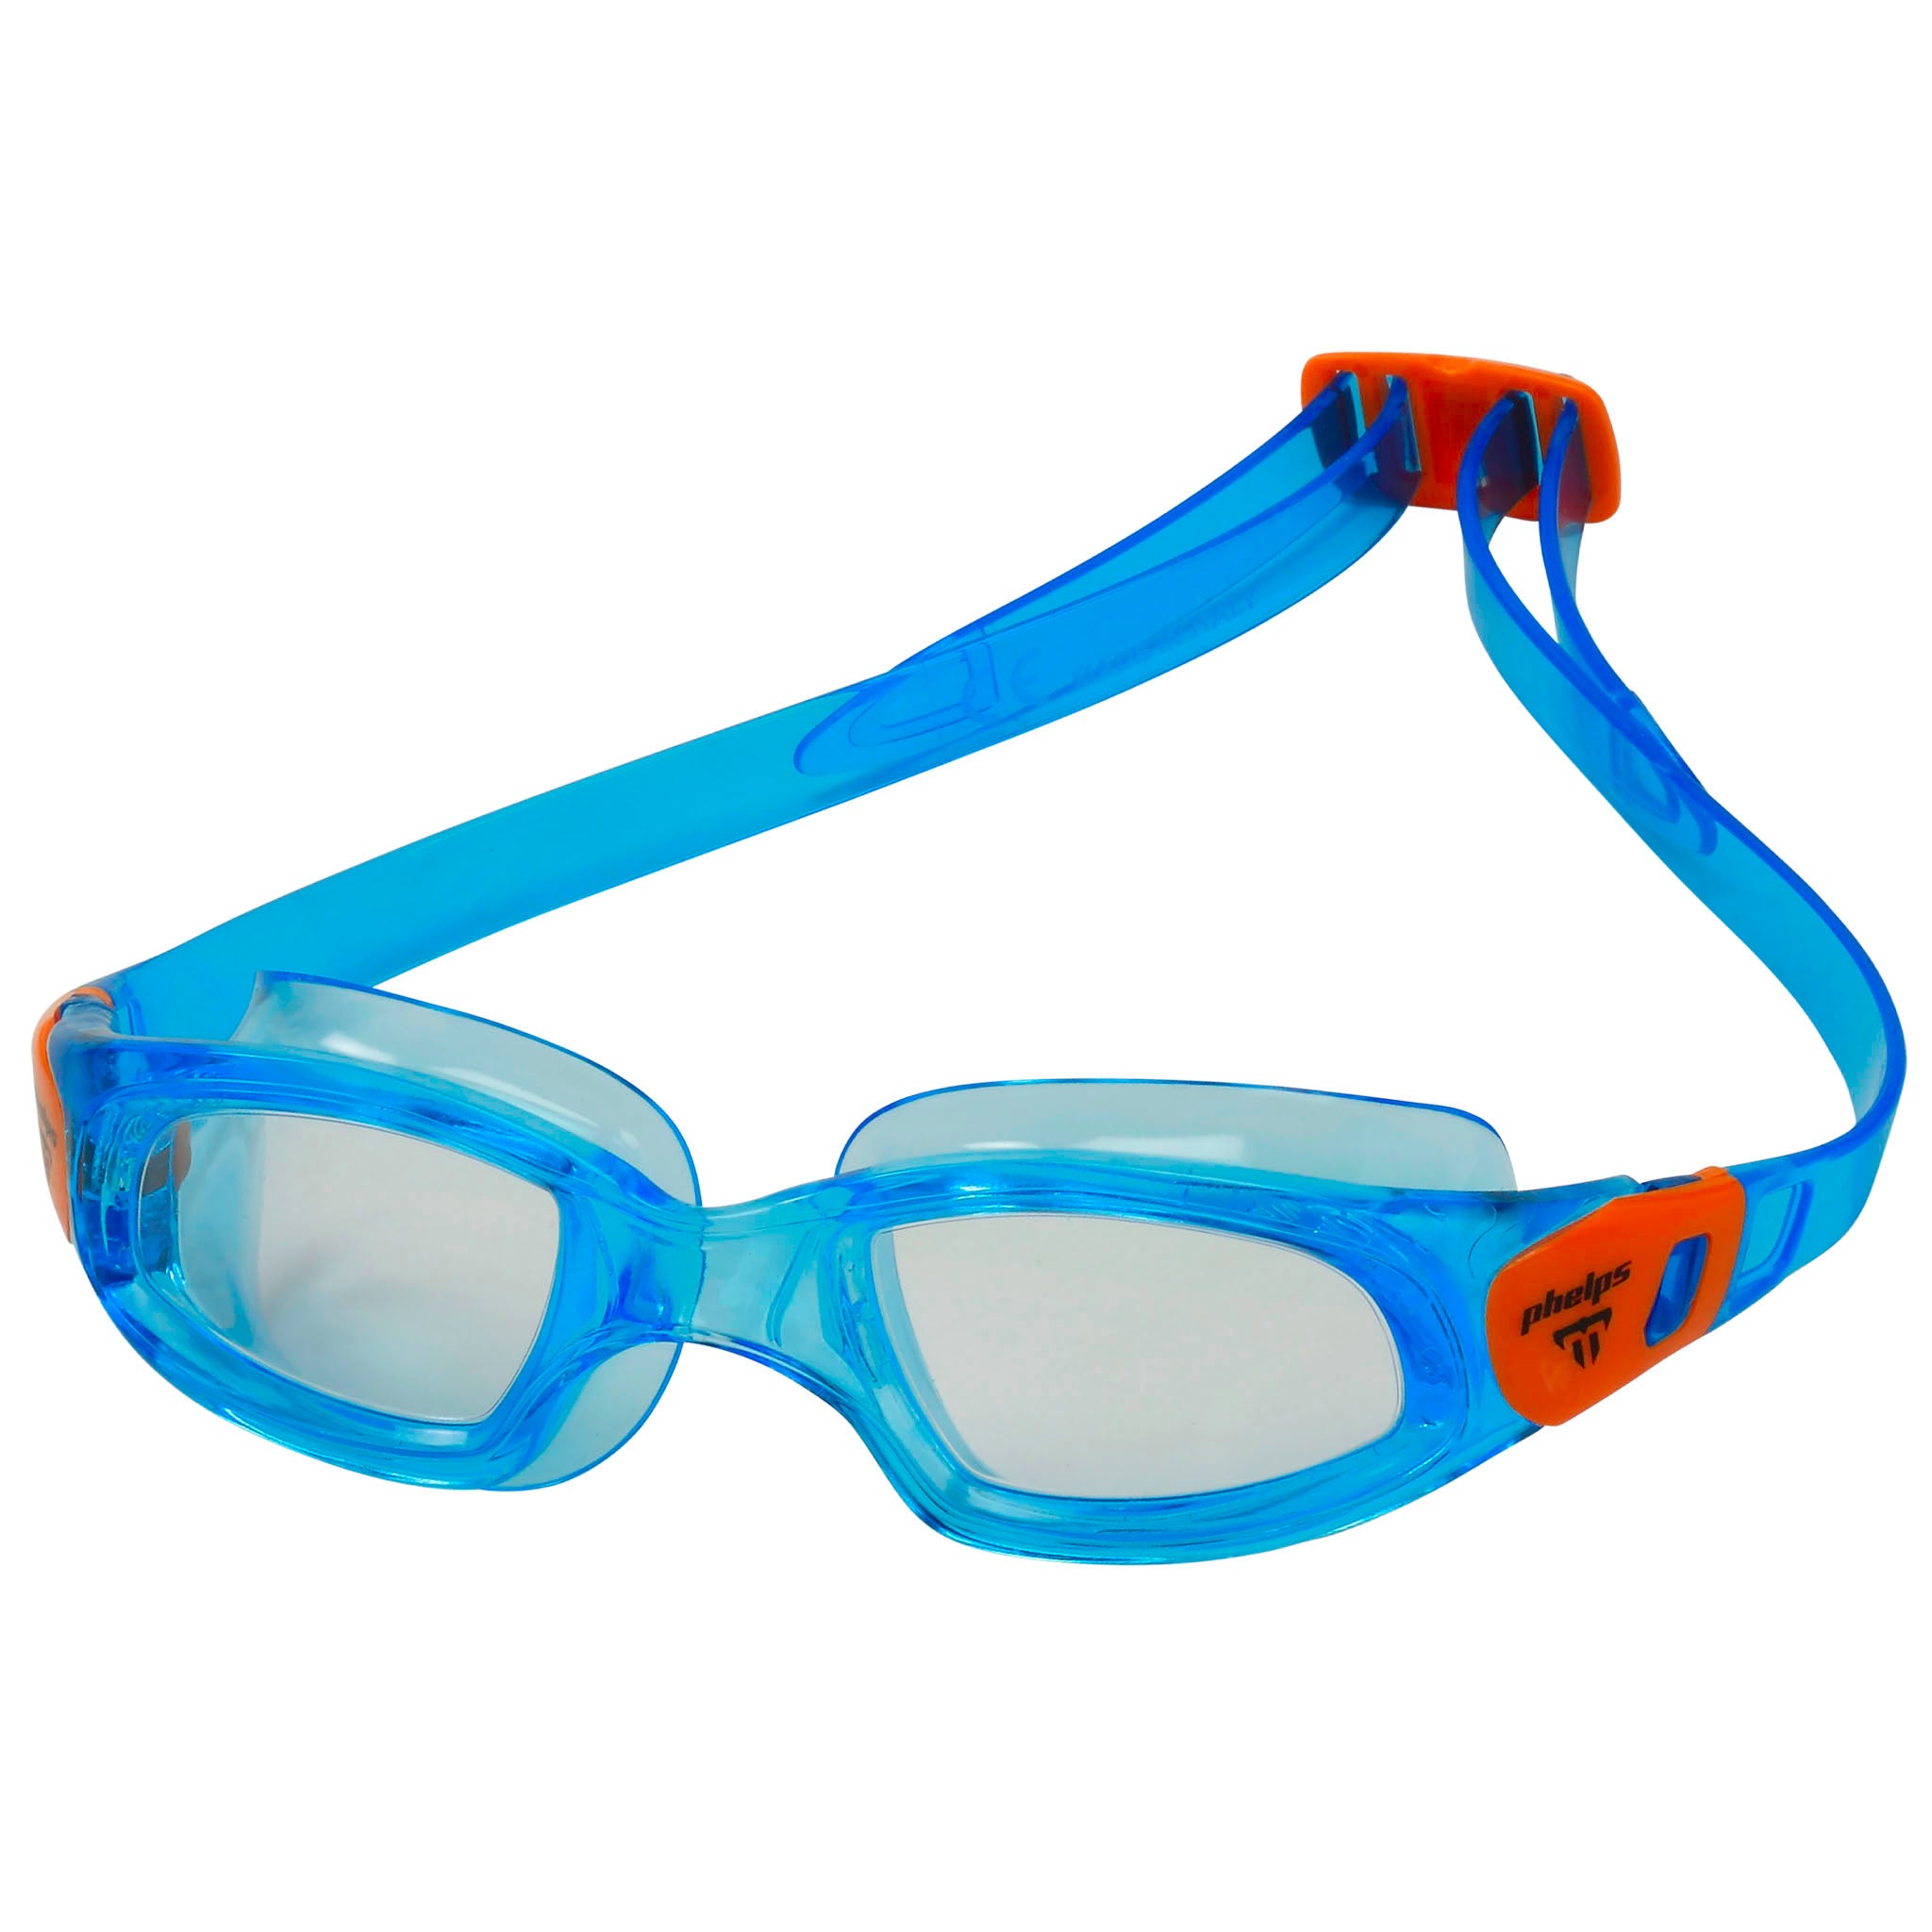 Phelps Tiburon Kid Swimming Goggles with Clear Lenses - Blue